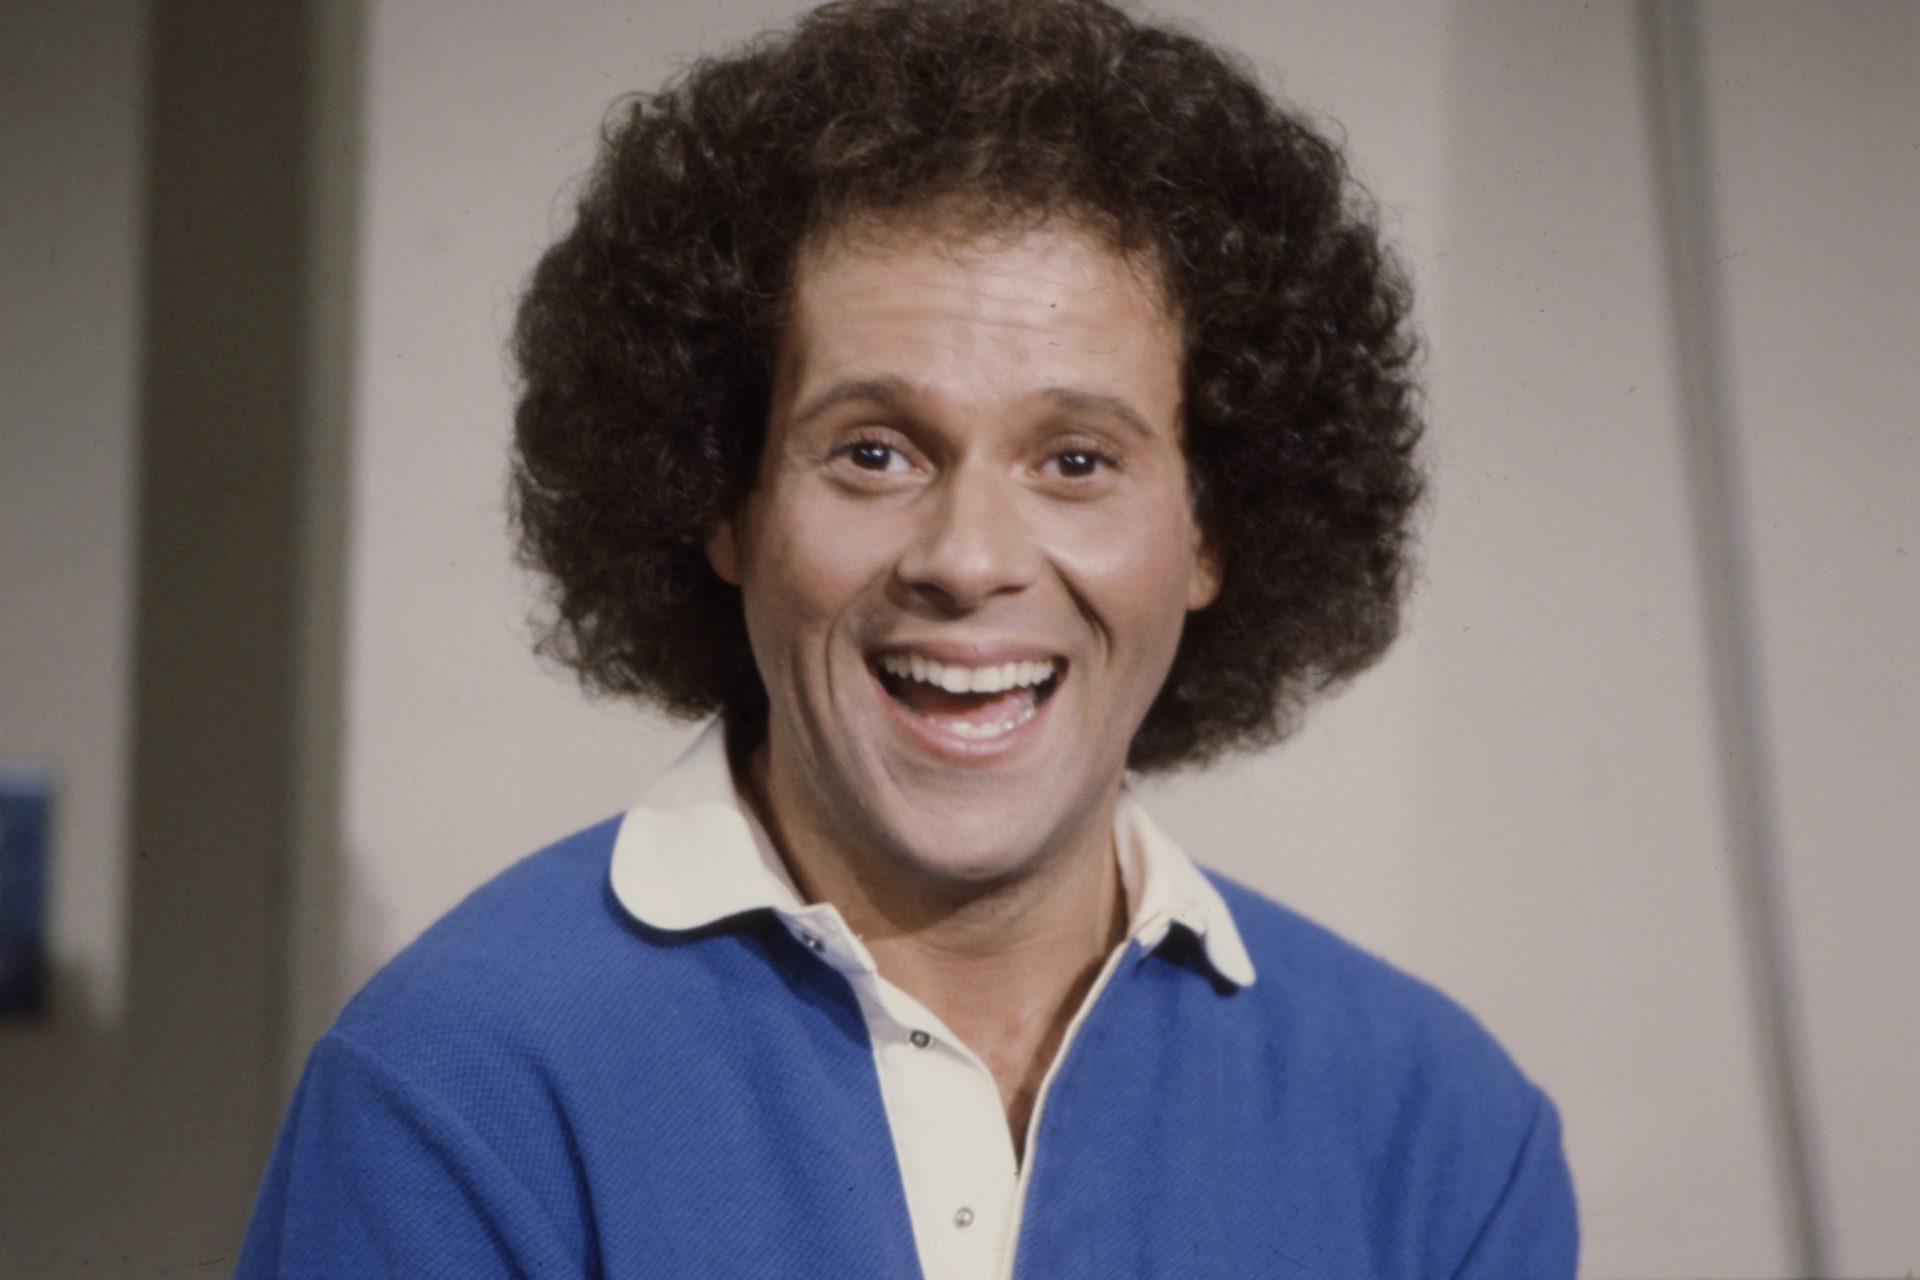 Richard Simmons: a look back at some of his best moments